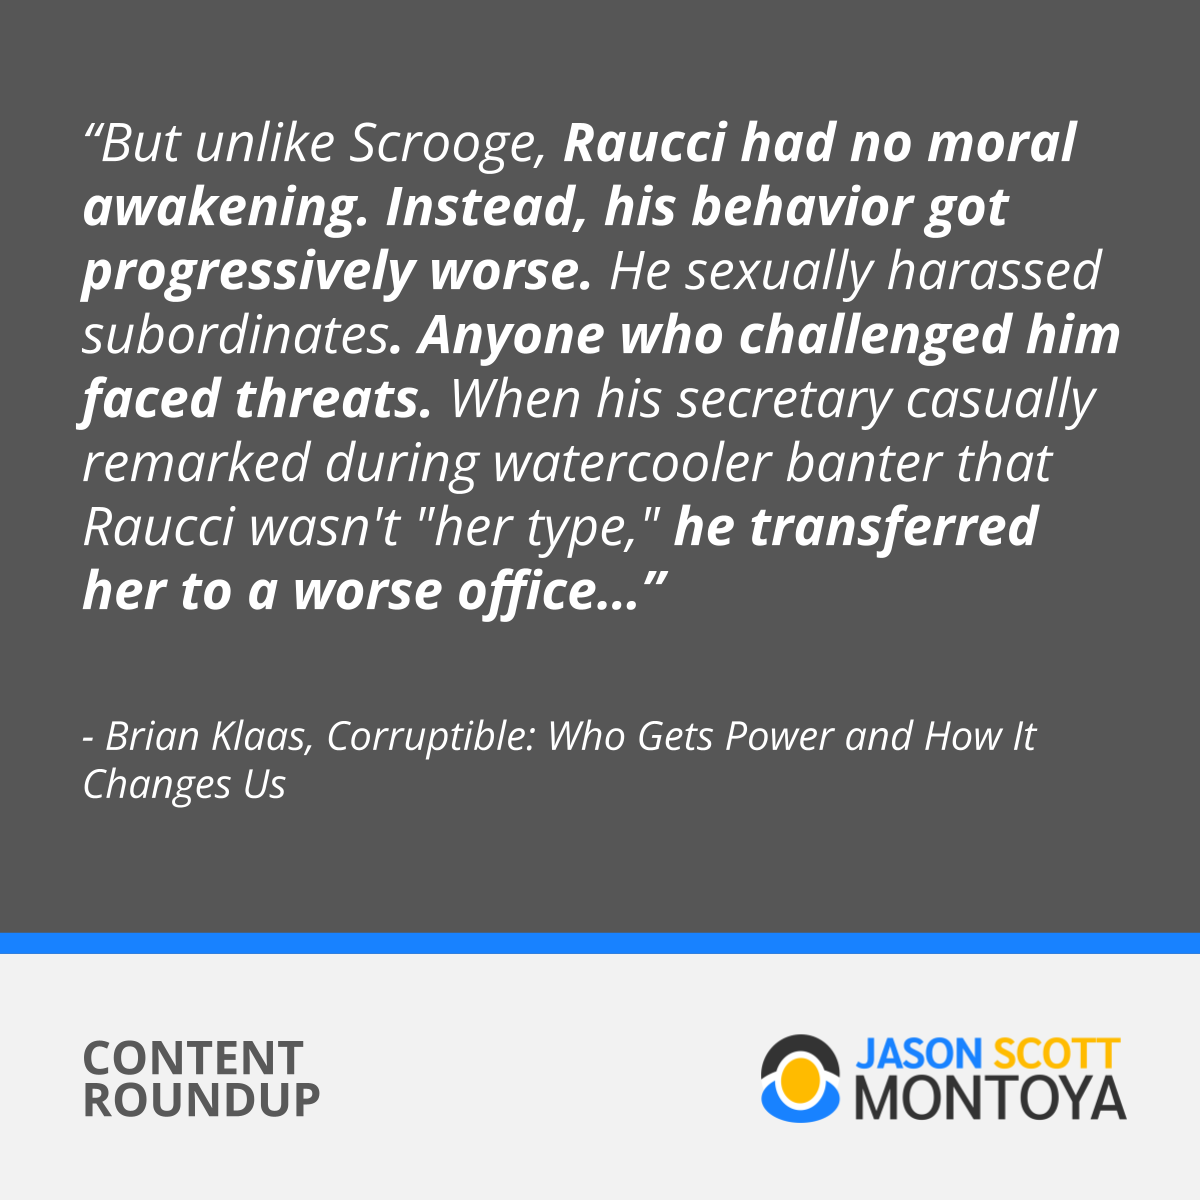 “But unlike Scrooge, Raucci had no moral awakening. Instead, his behavior got progressively worse. He sexually harassed subordinates. Anyone who challenged him faced threats. When his secretary casually remarked during watercooler banter that Raucci wasn't 